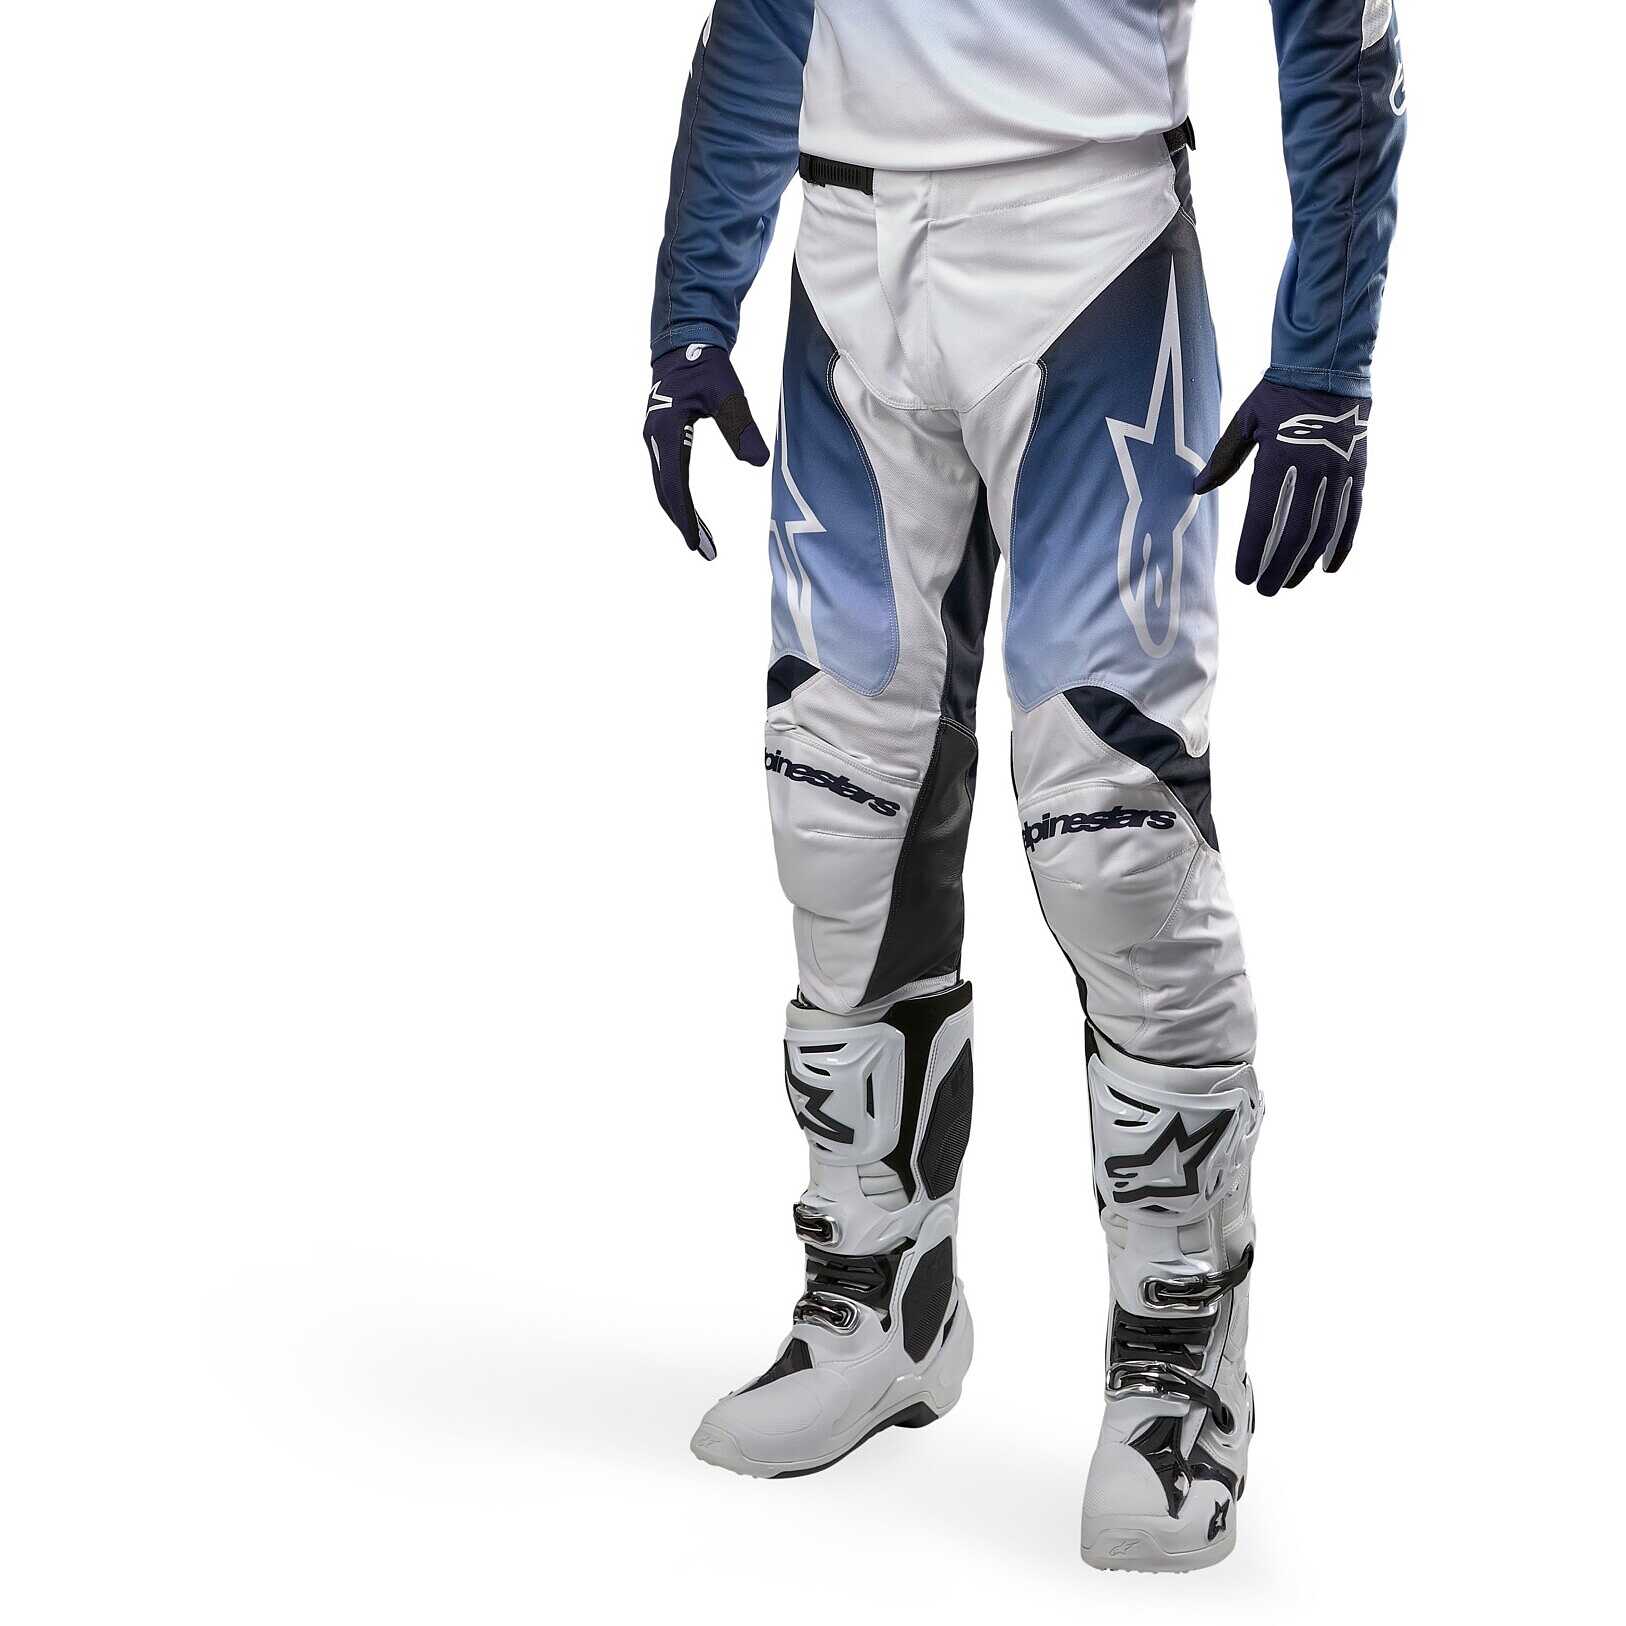 REV'IT Stratum GTX Motorcycle Pants - Short - My Cooling Store